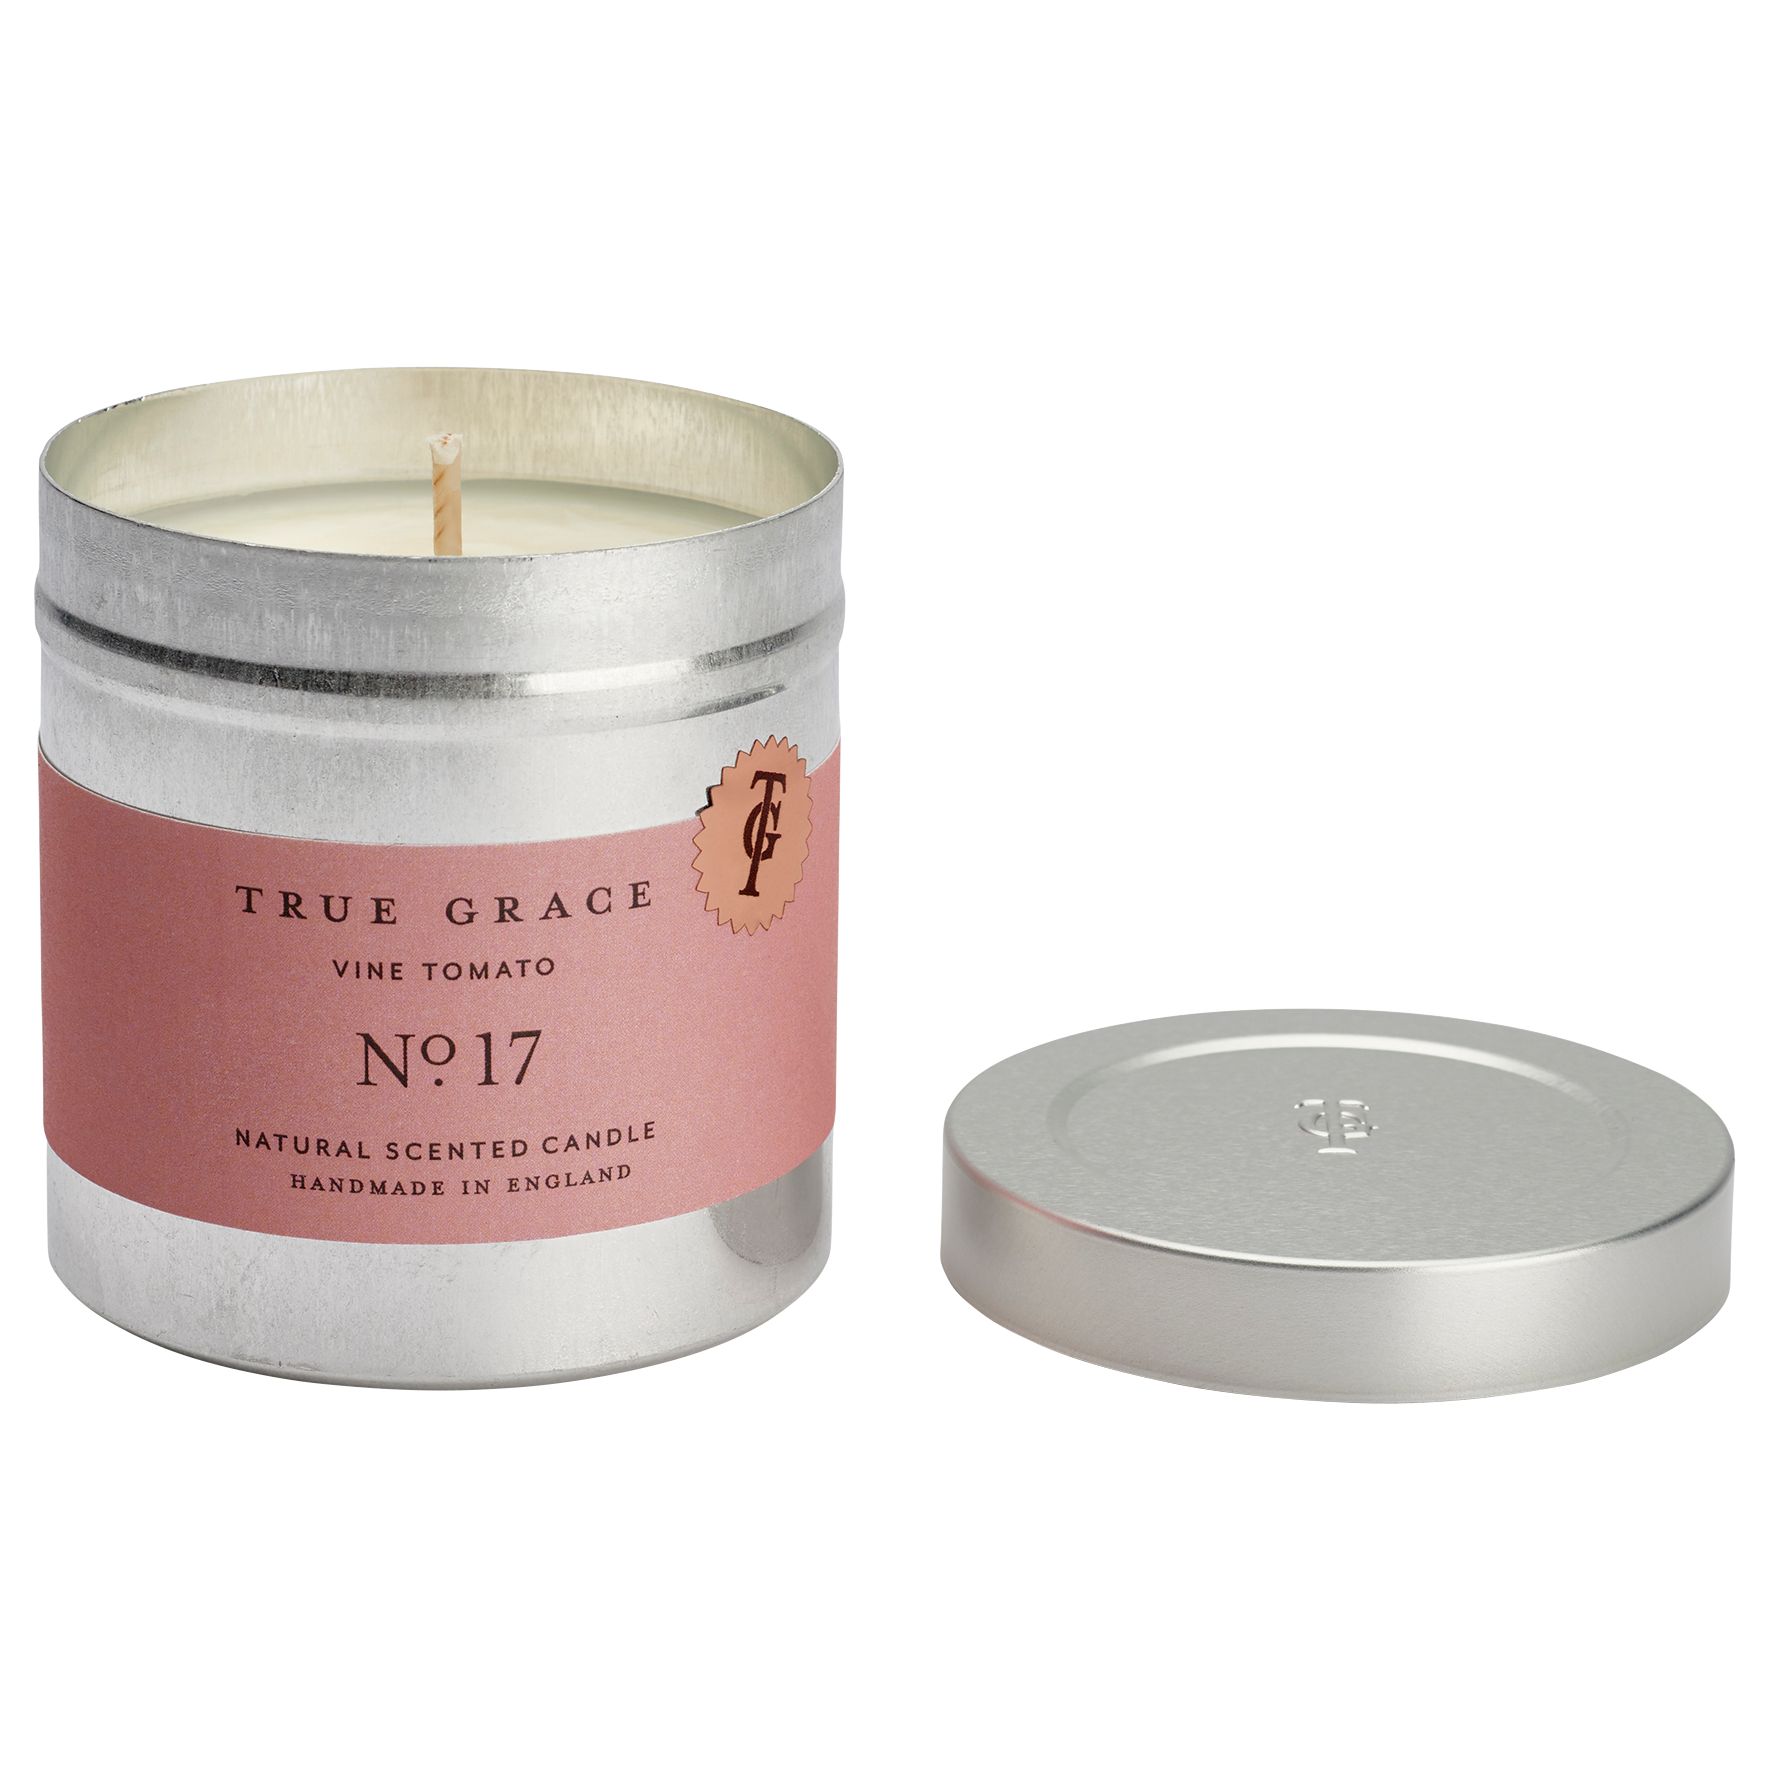 True Grace Walled Garden Vine Tomato Scented Candle Tin